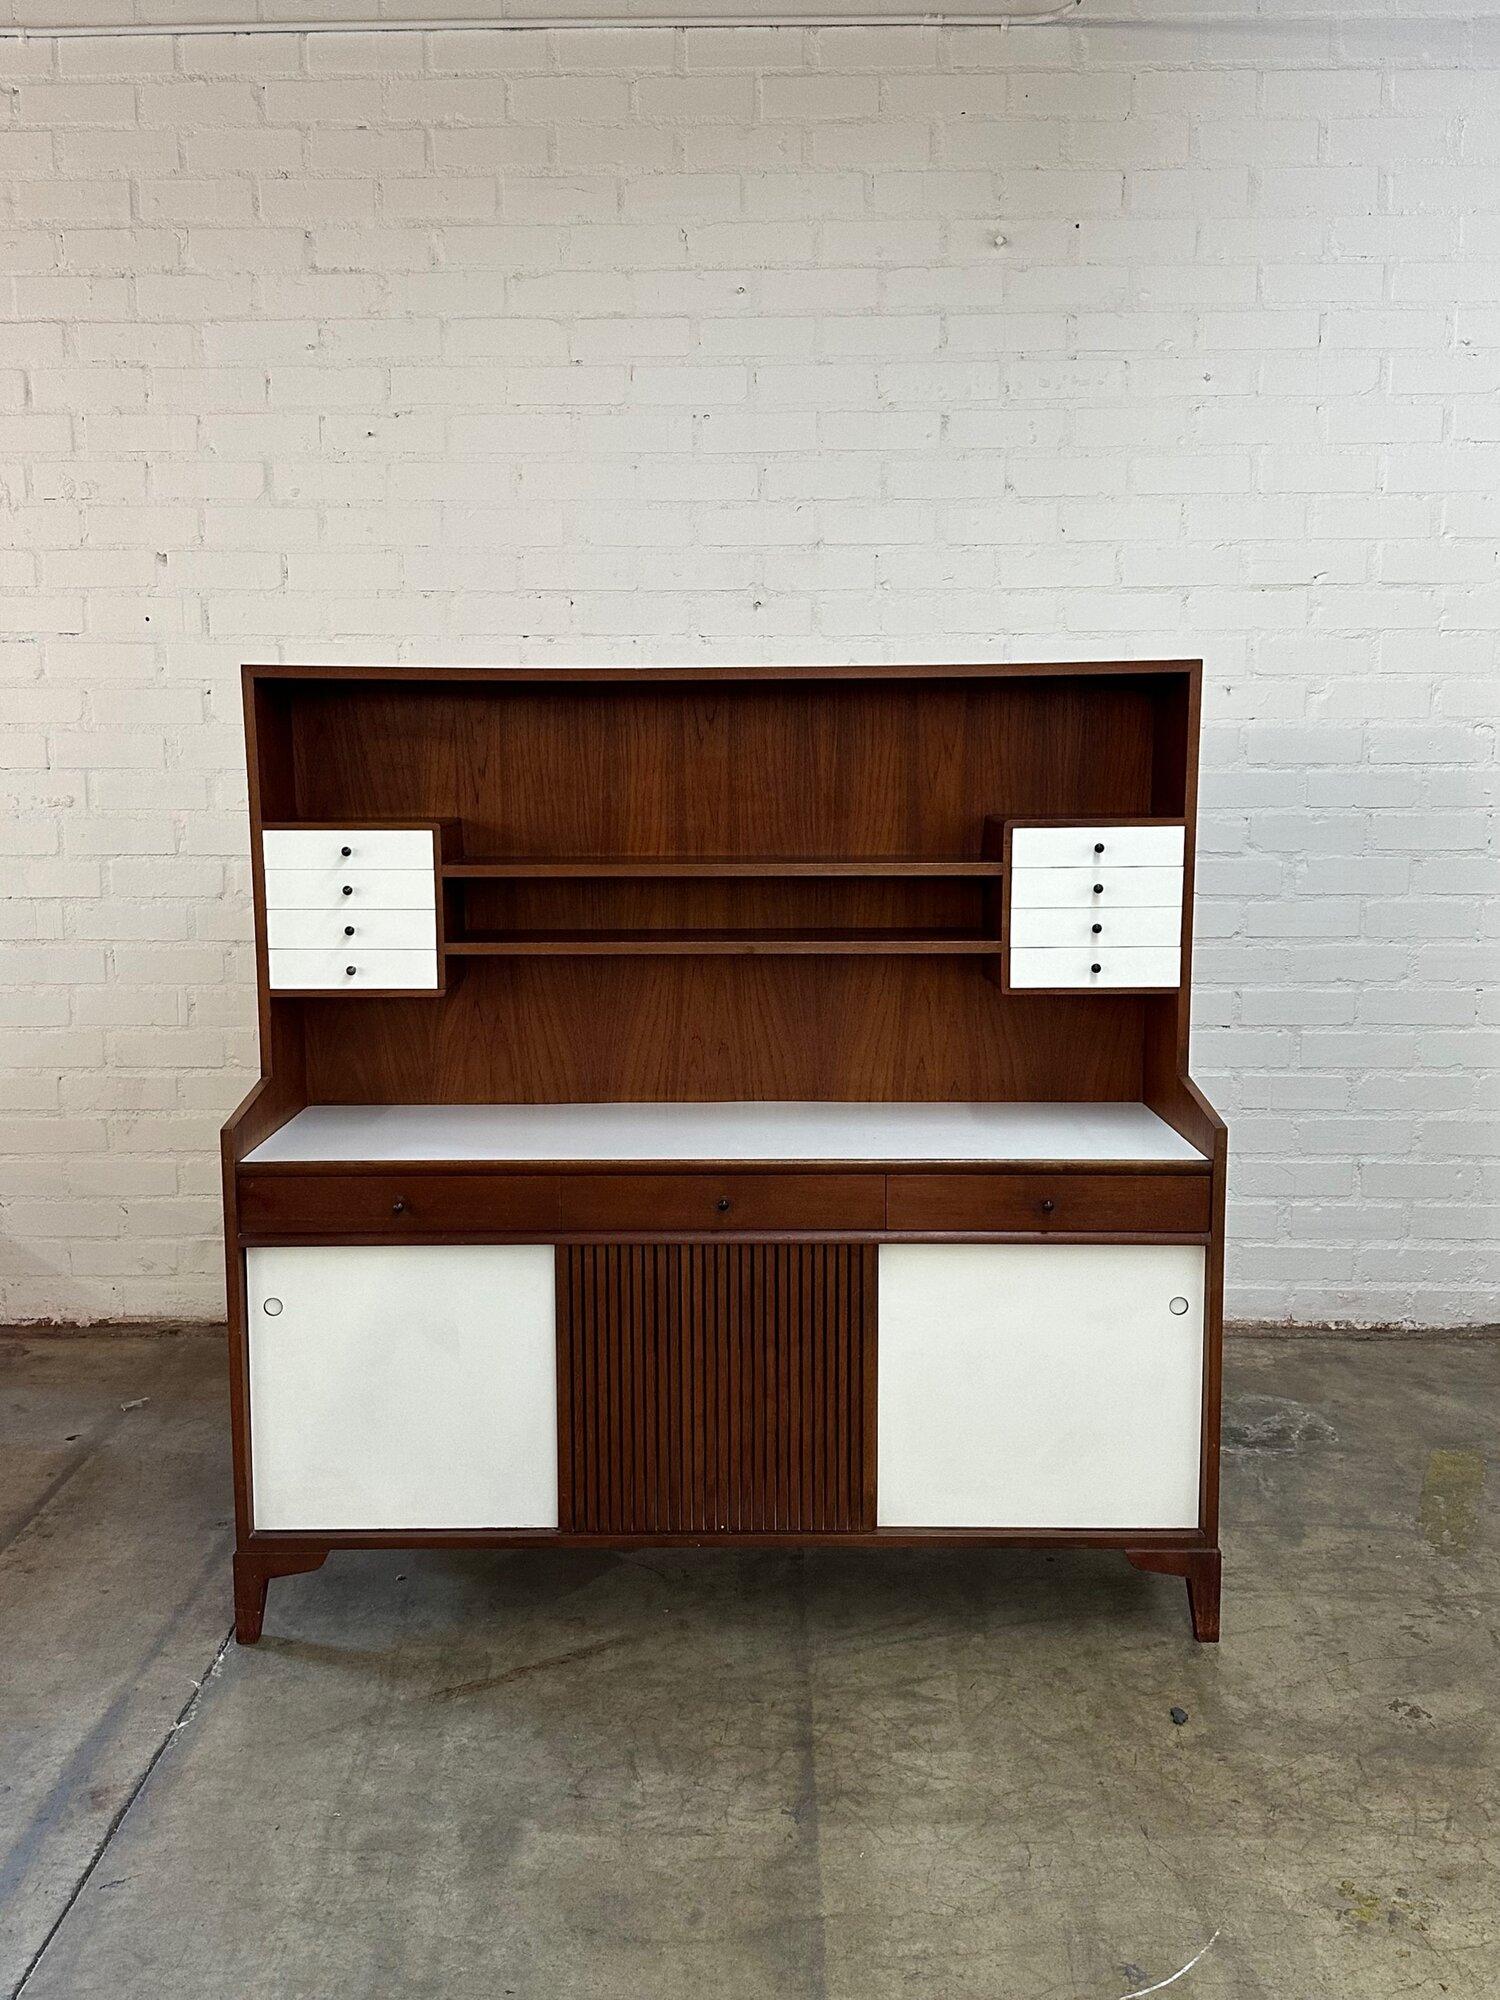 W60 D18.25 H60

Vintage solid walnut and white laminate credenza hutch combo. Item is structurally sound in great AS FOUND condition. Item has a very nice durable white laminated surface great for cups and drinks. This item is one solid piece and